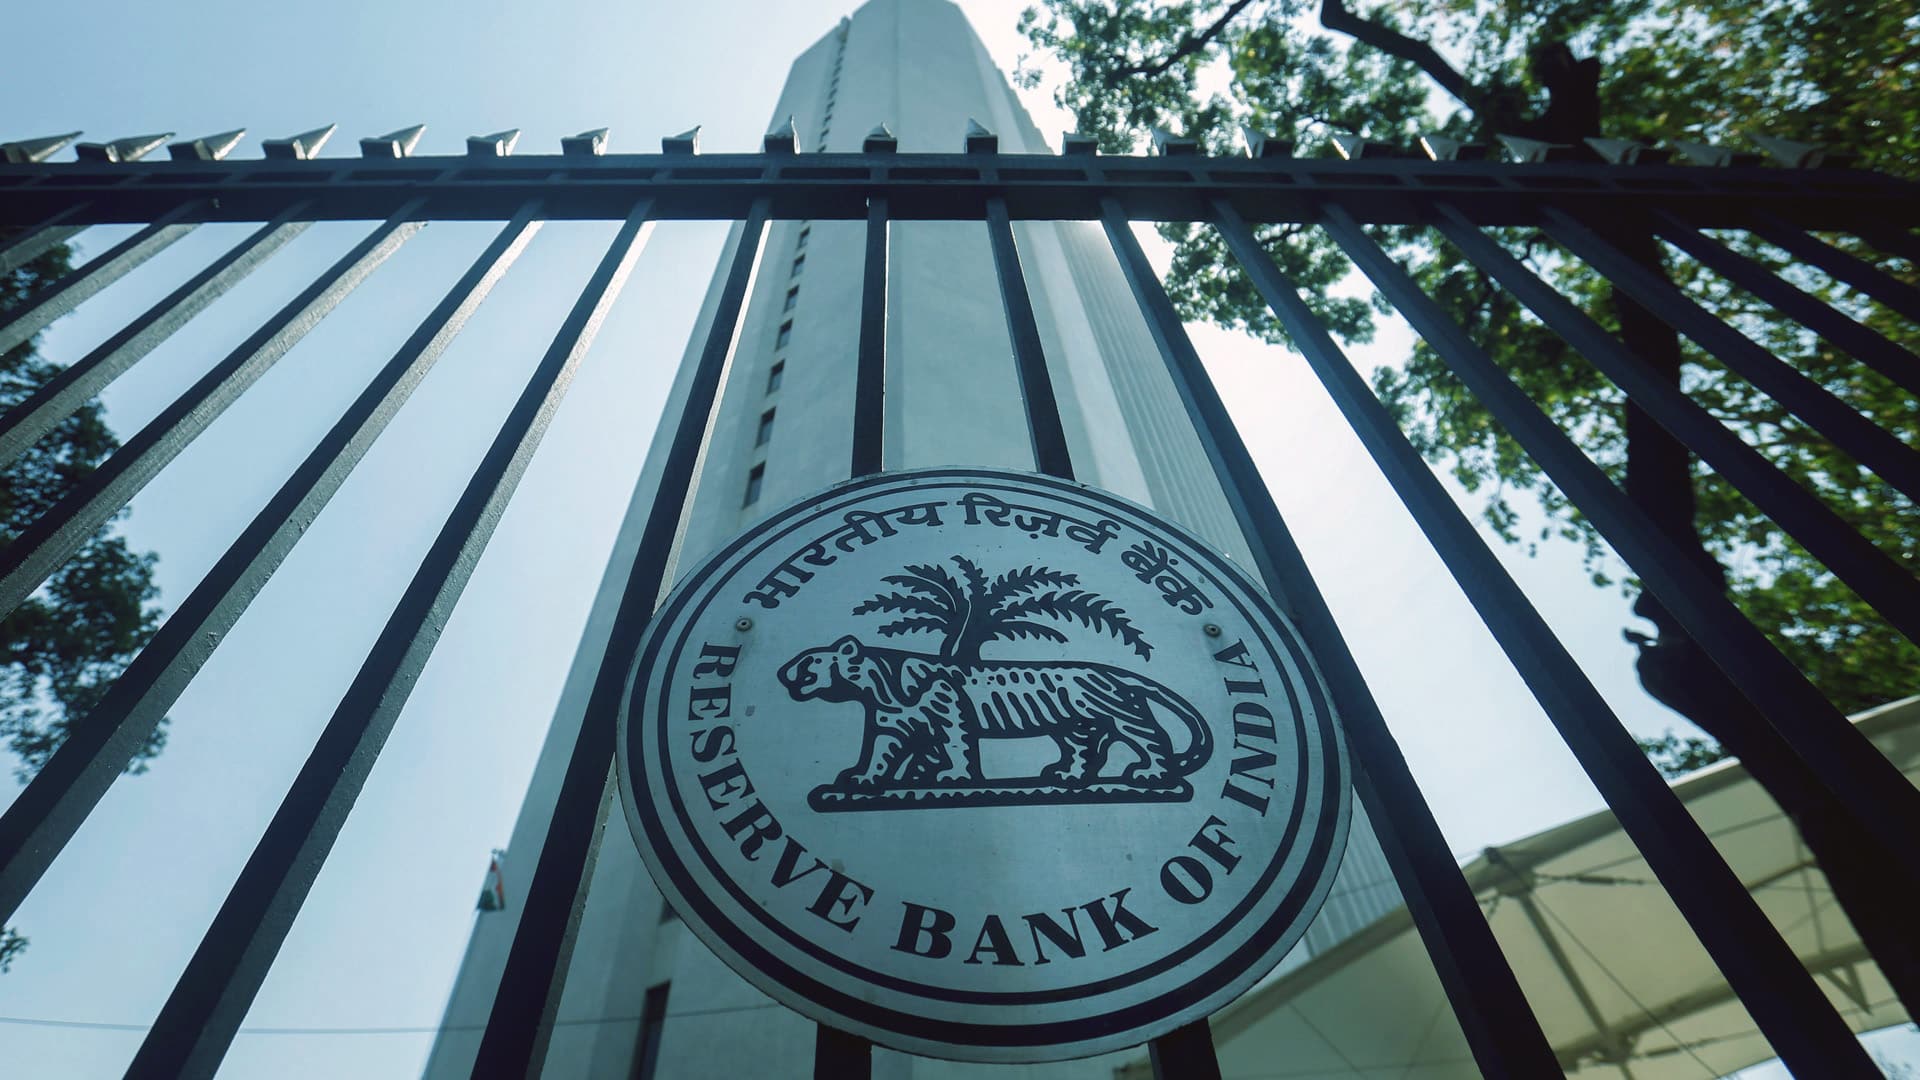 Ombudsman scheme to provide cost-free redress of customer complaints: RBI